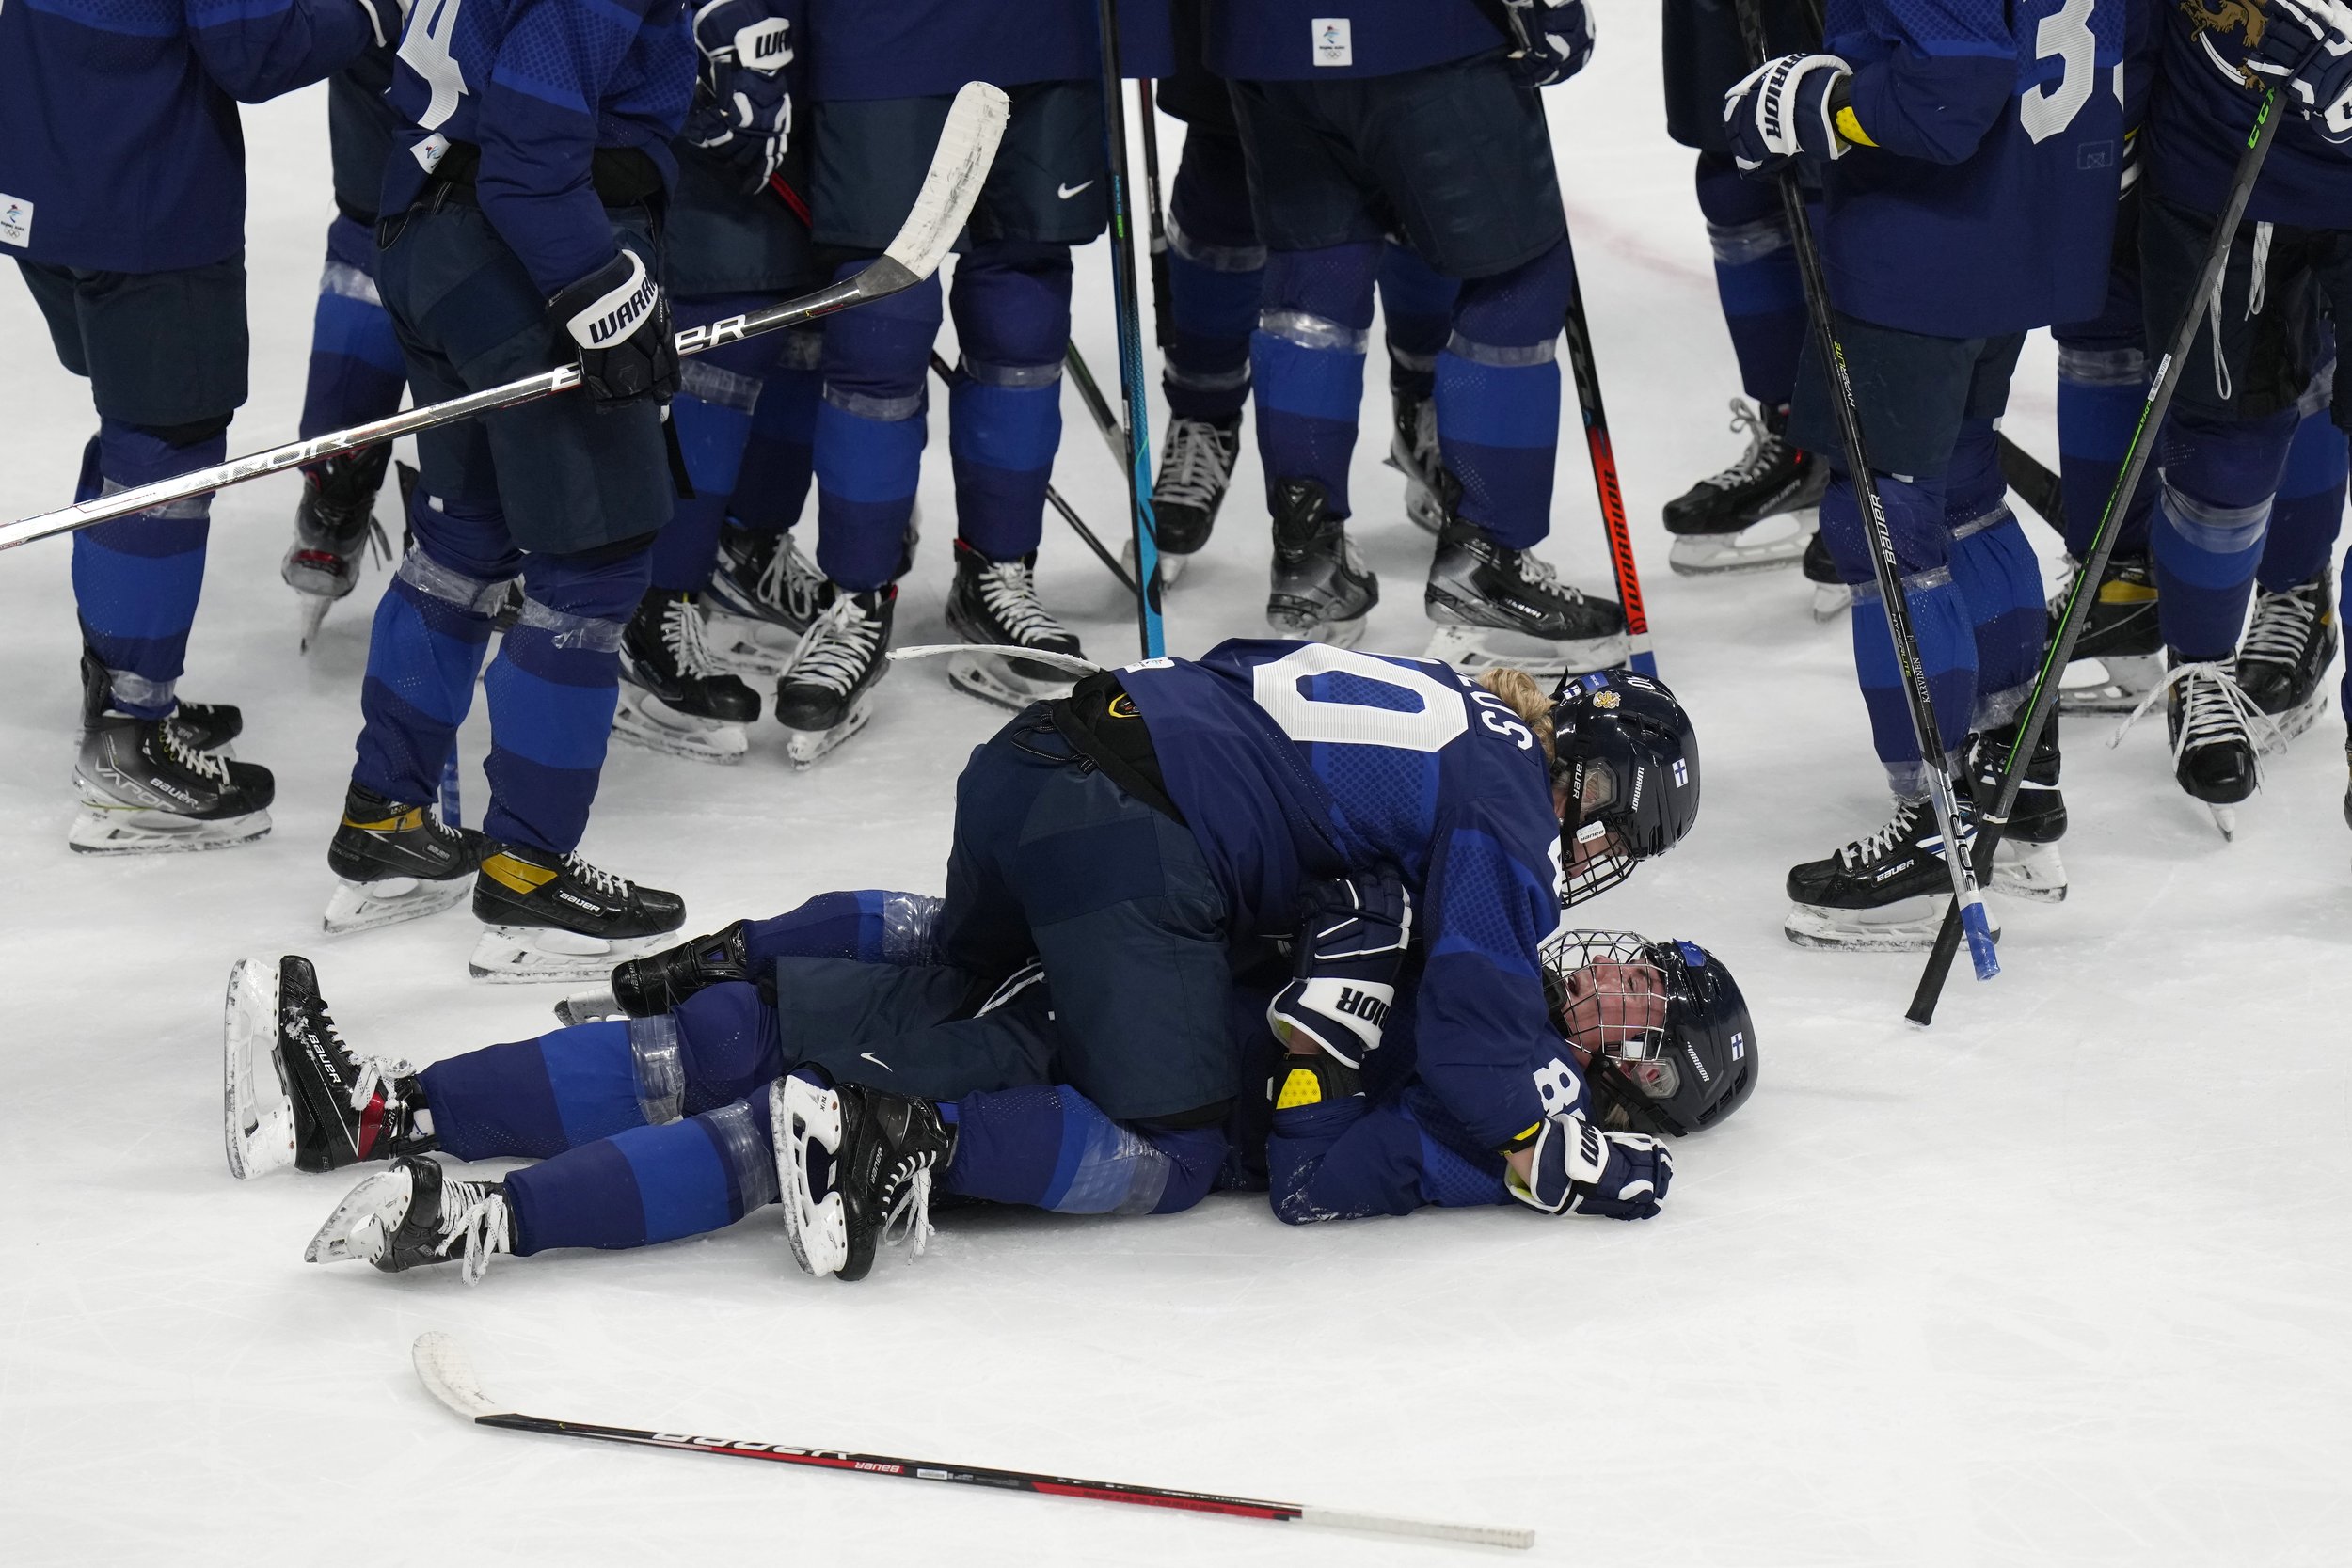  Finland celebrates after beating Switzerland in the women's bronze medal hockey game at the 2022 Winter Olympics, Wednesday, Feb. 16, 2022, in Beijing. (AP Photo/Petr David Josek) 